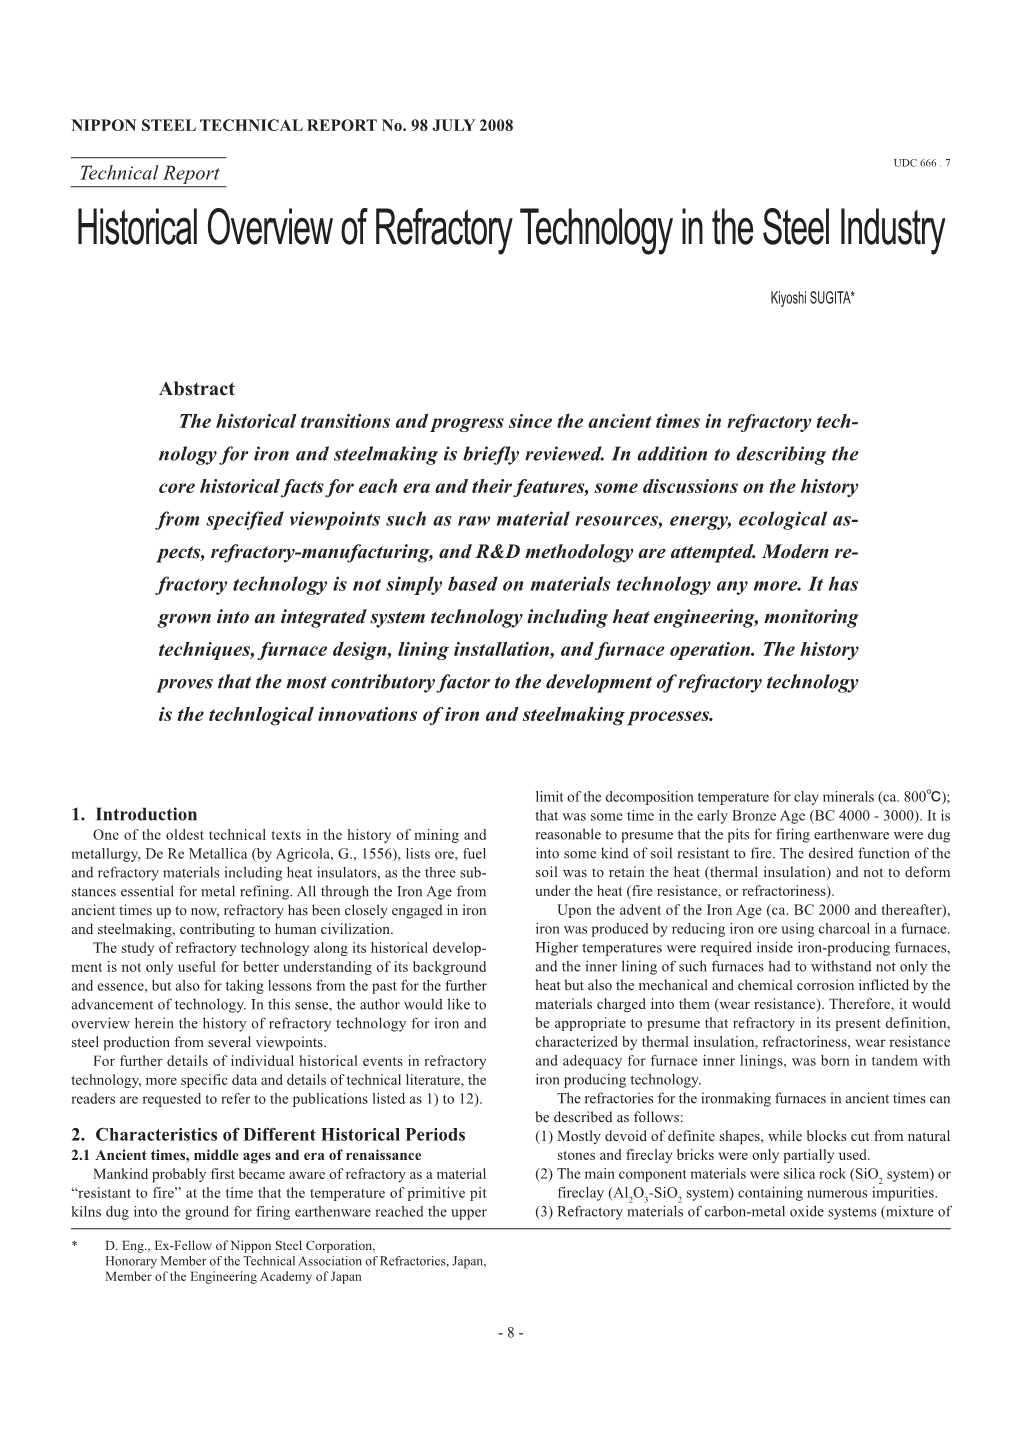 Historical Overview of Refractory Technology in the Steel Industry K